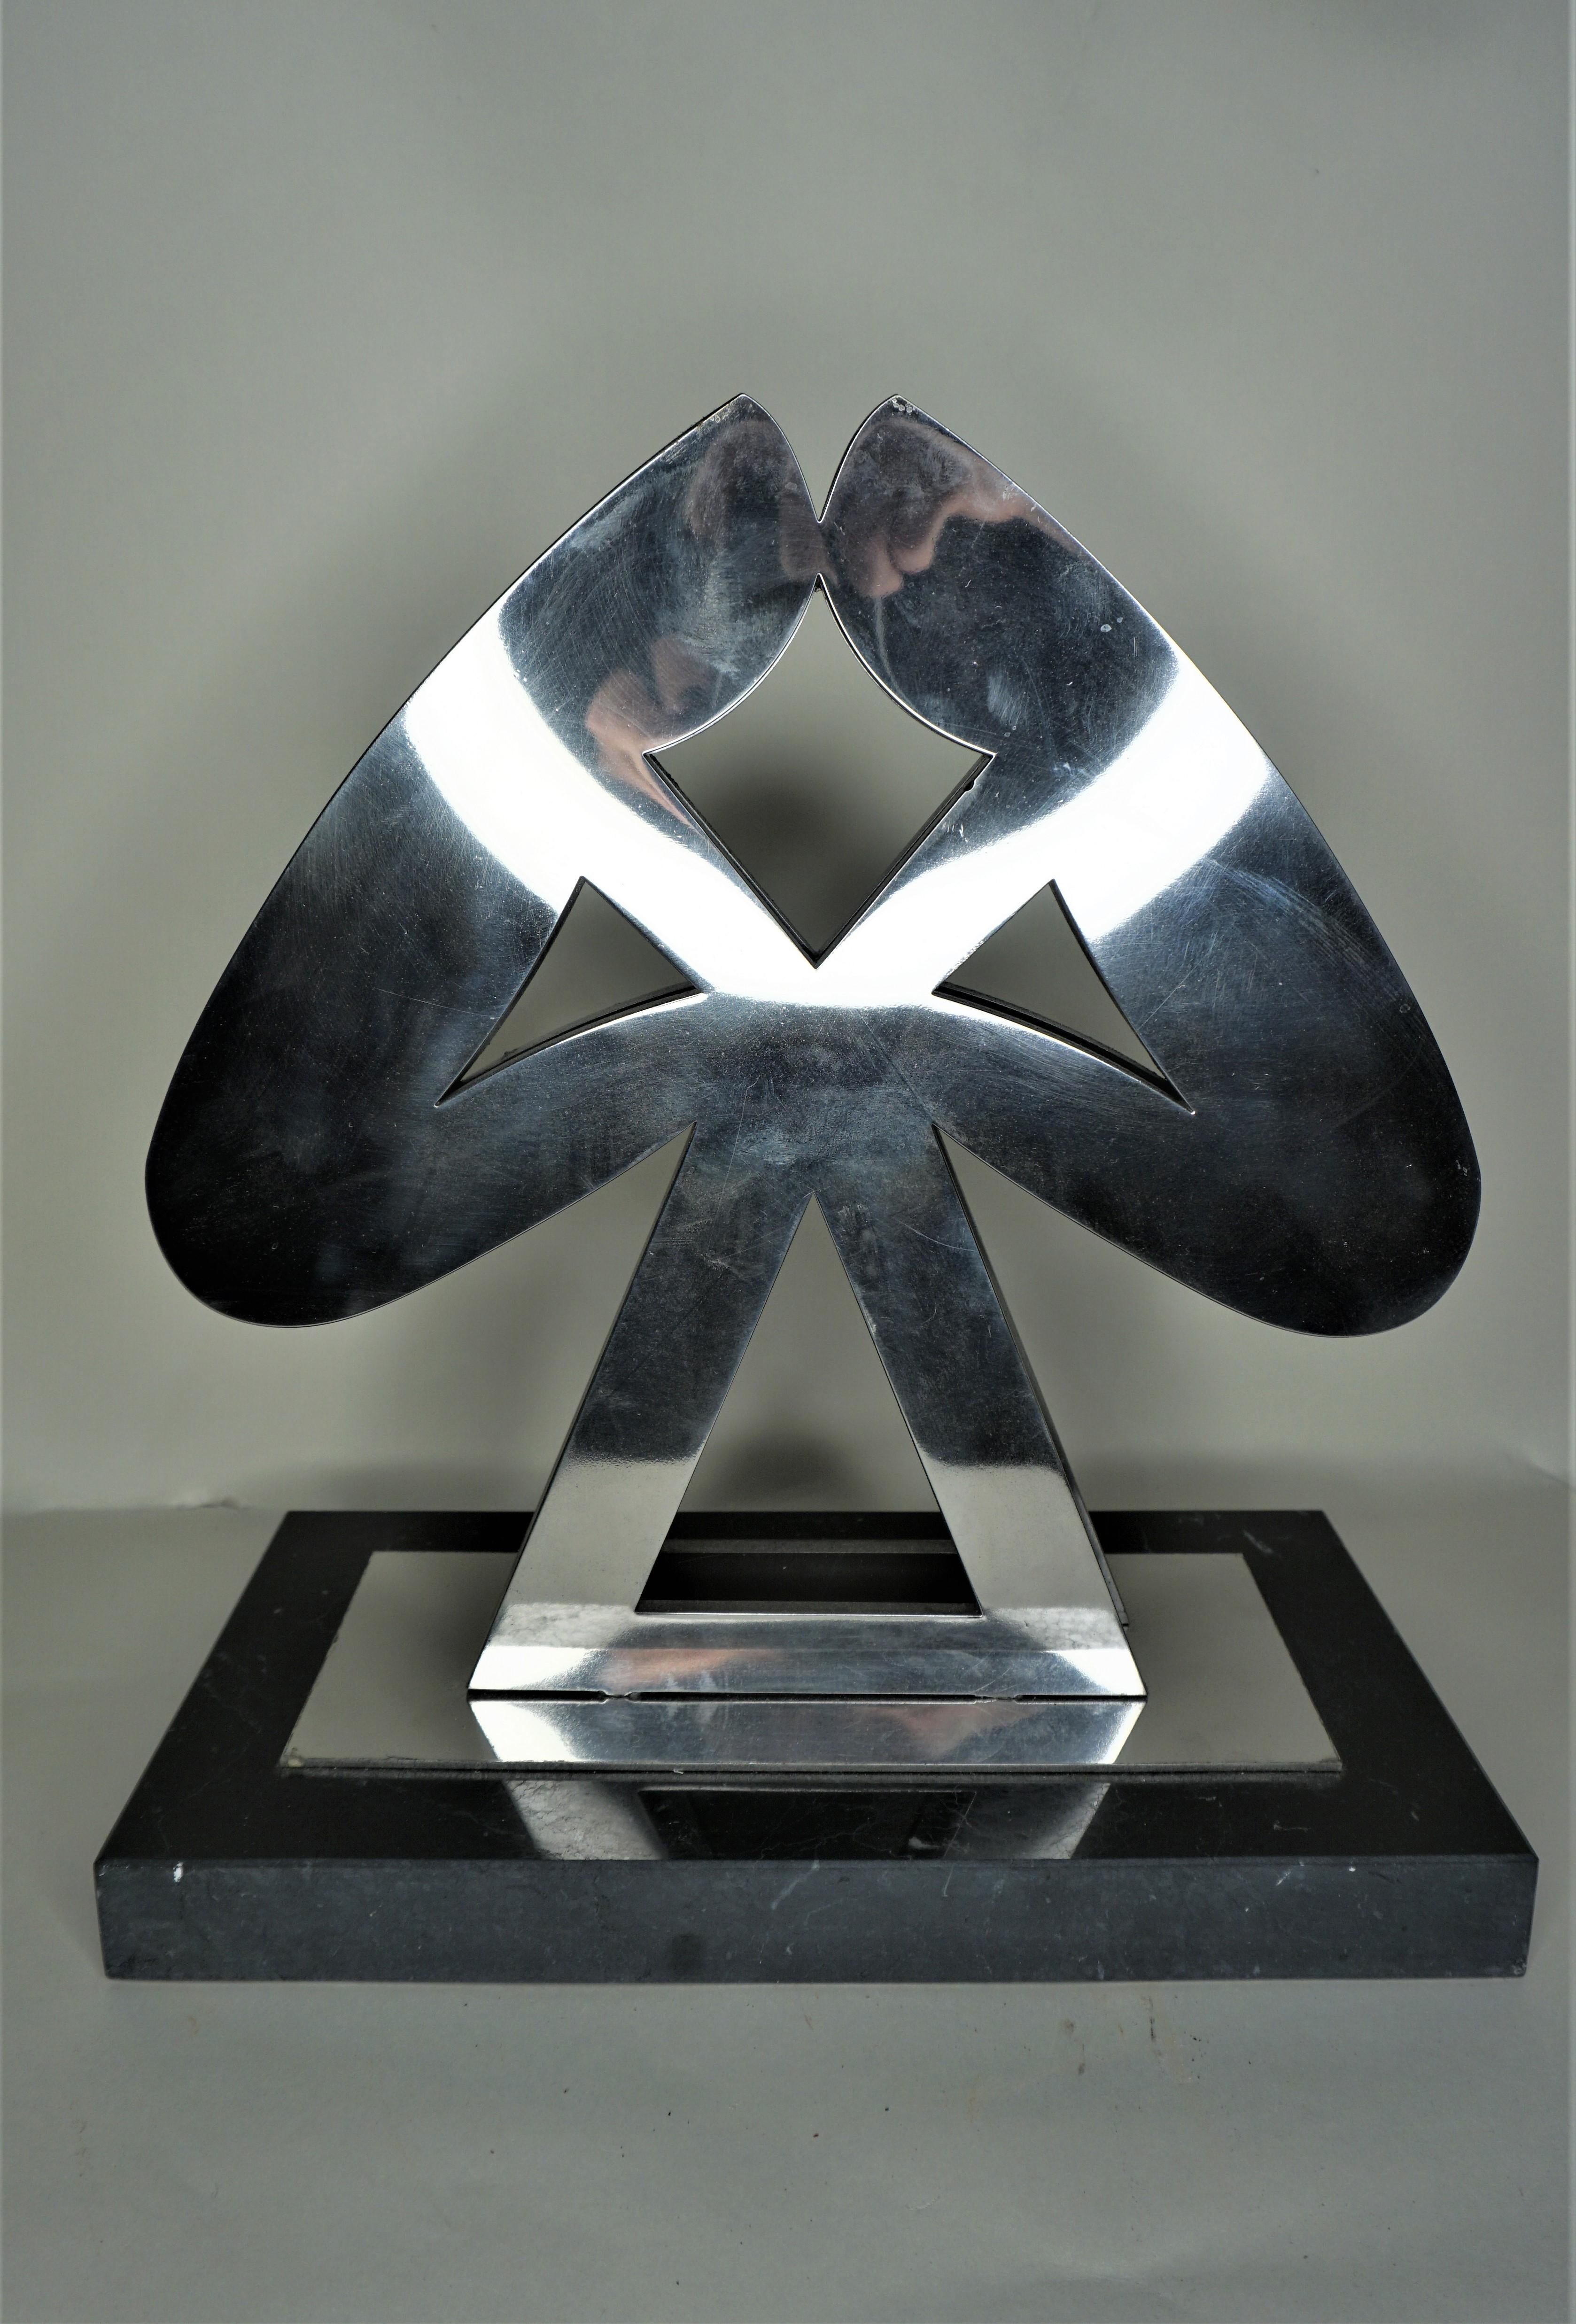 Dispute - Gray Abstract Sculpture by Victor Prodanchuk